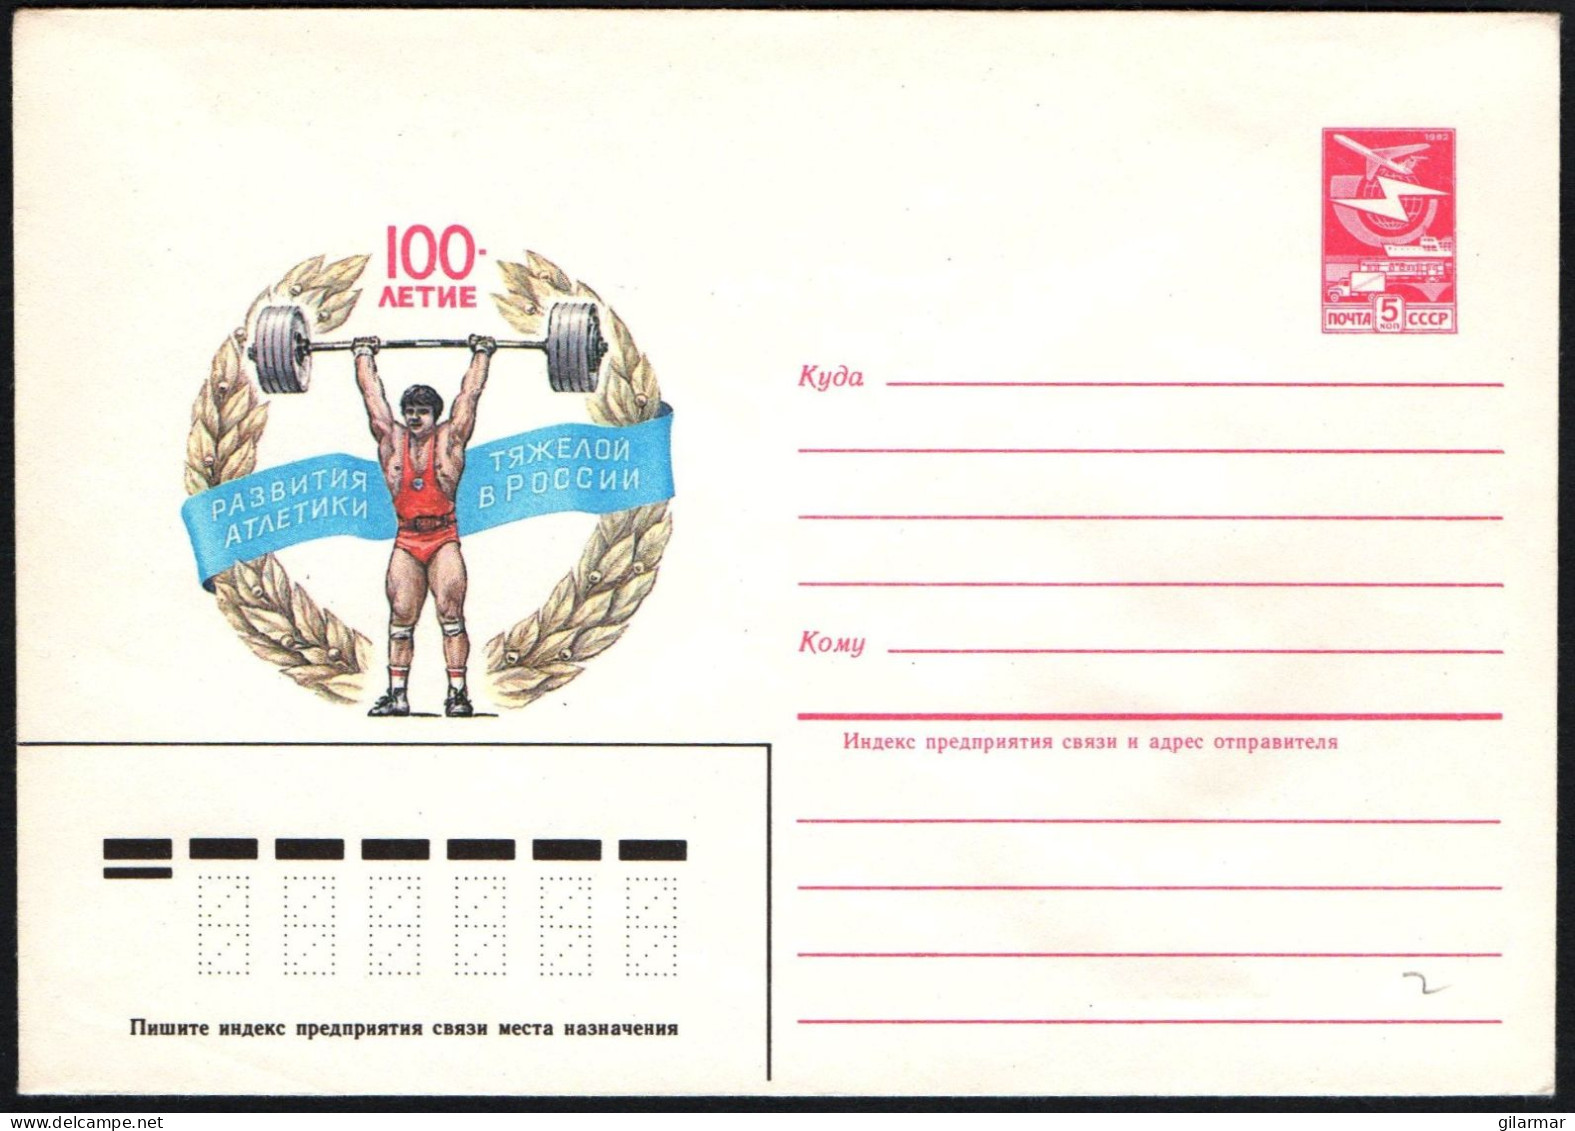 SOVIET UNION 1984 - 100th ANNIVERSARY OF WEIGHTLIFTING IN RUSSIA - MINT POSTAL STATIONERY - G - Weightlifting